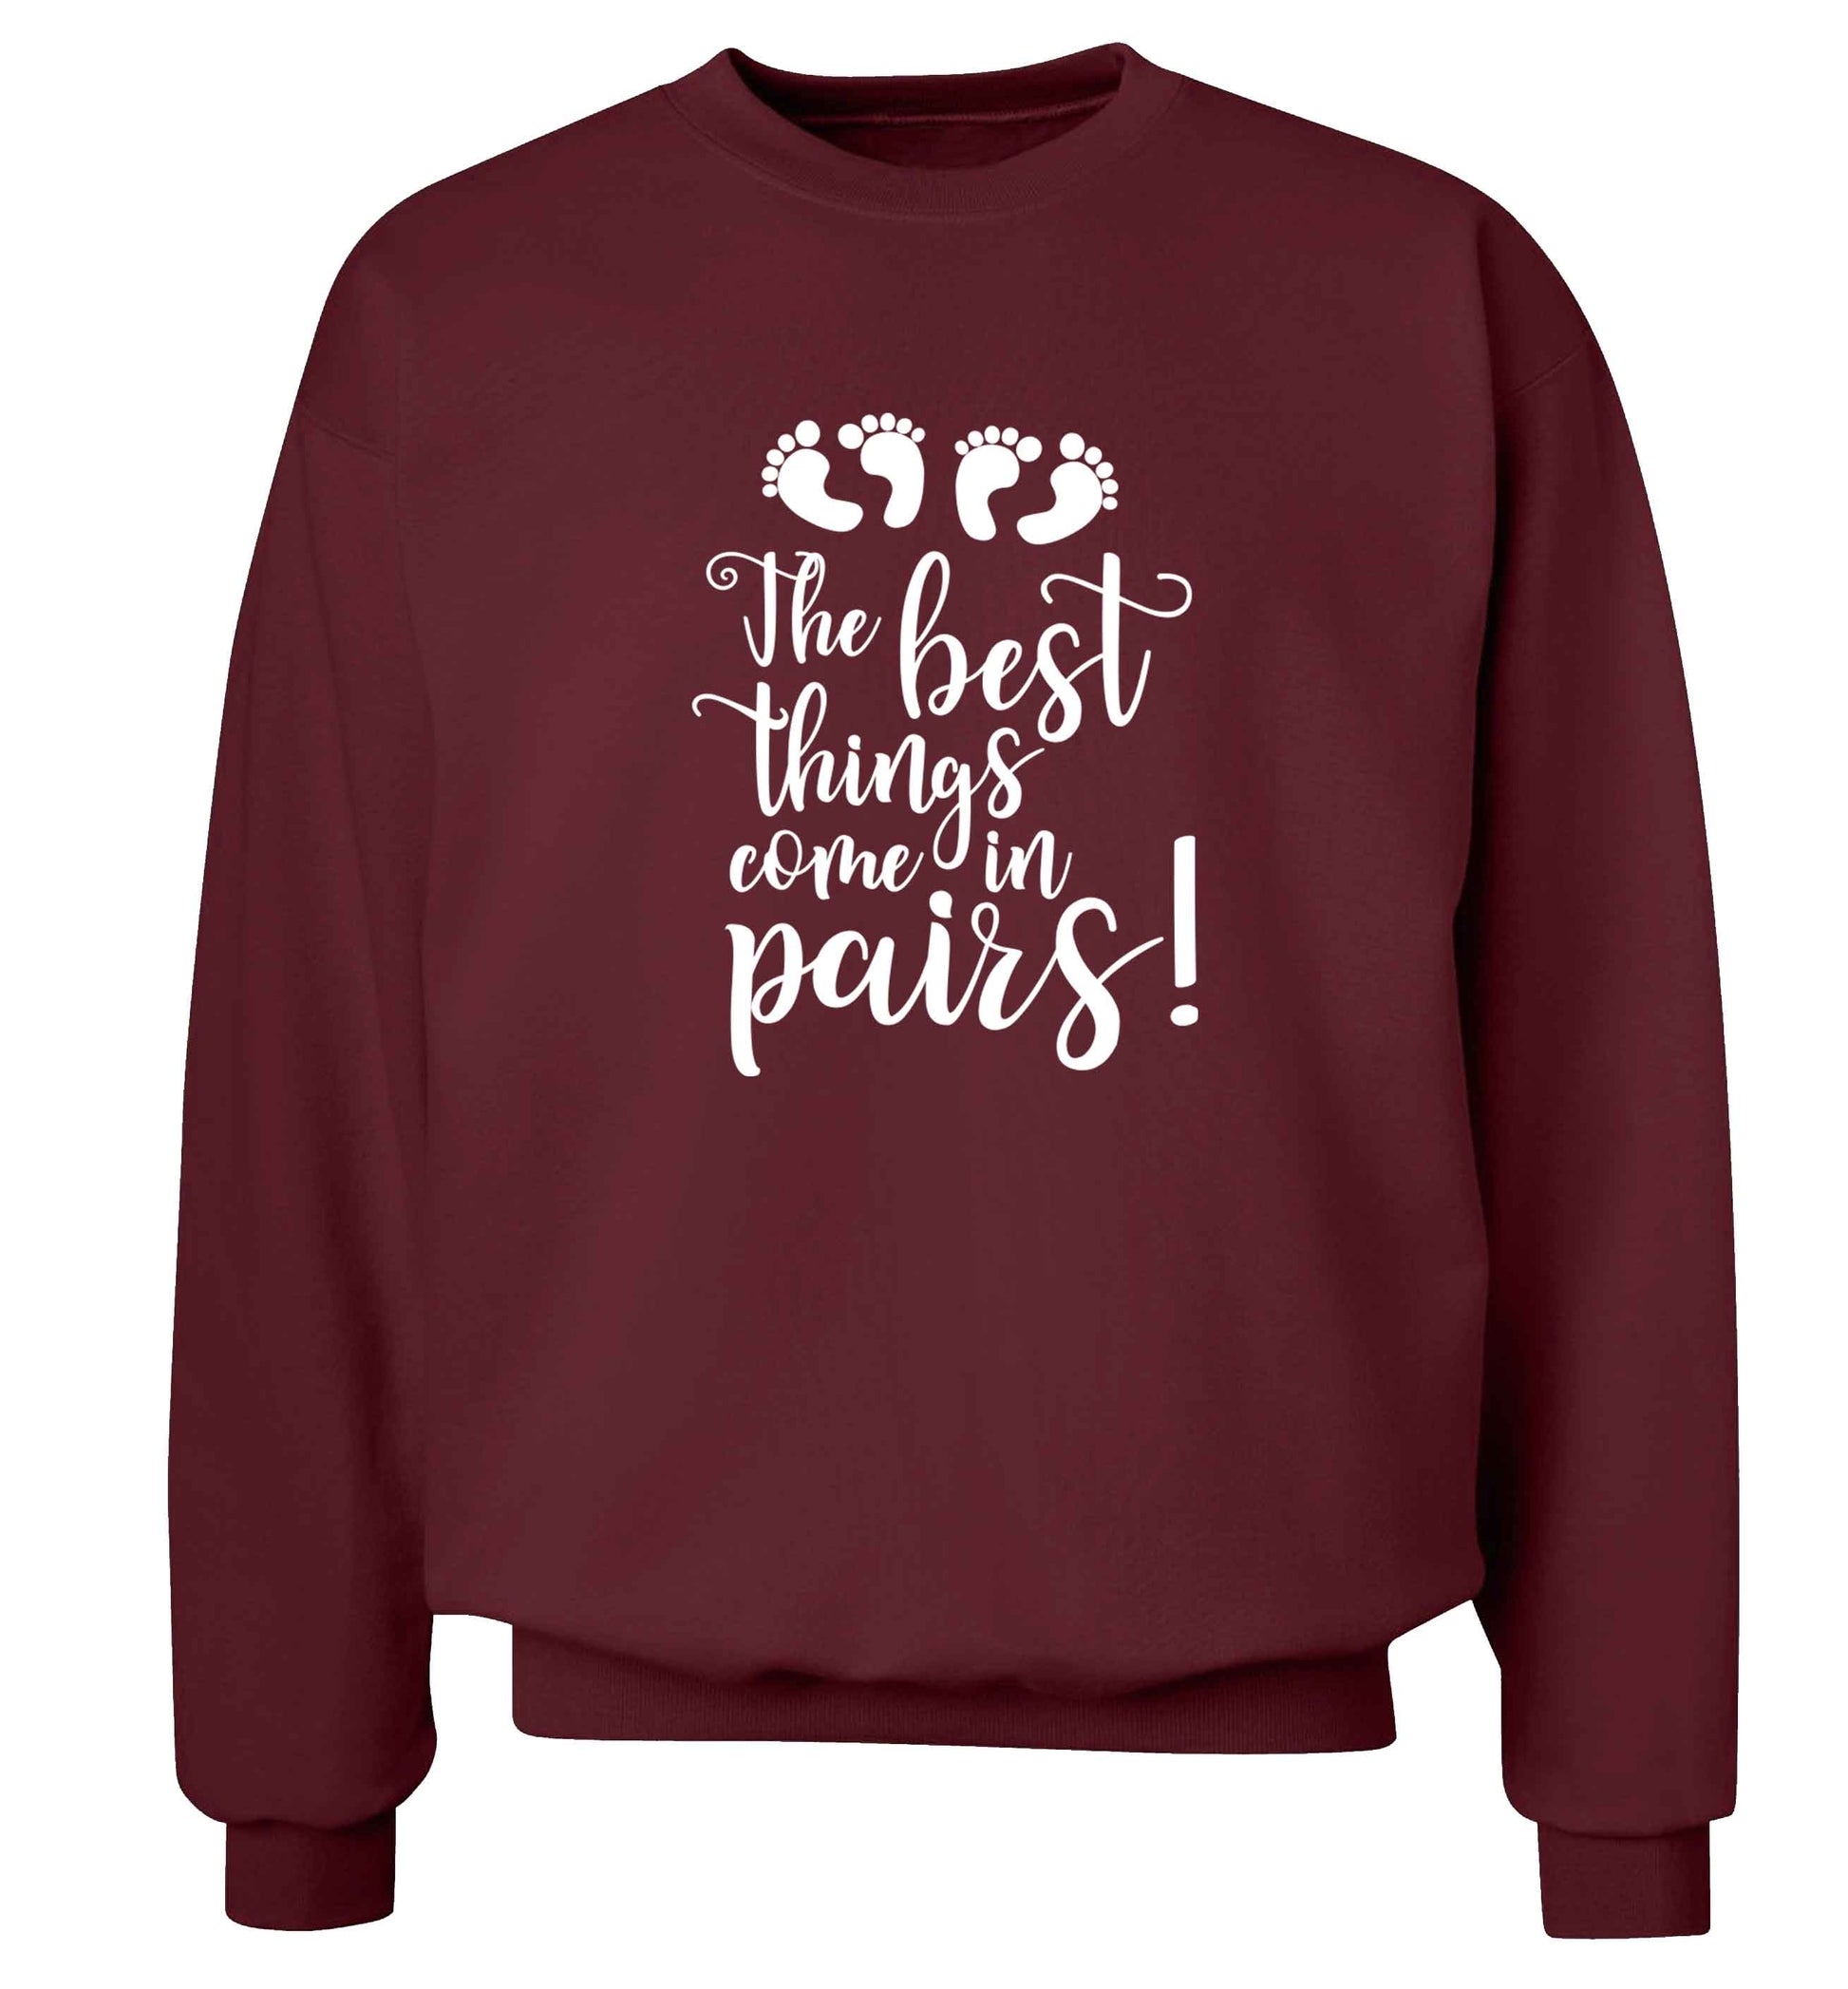 The best things come in pairs! adult's unisex maroon sweater 2XL